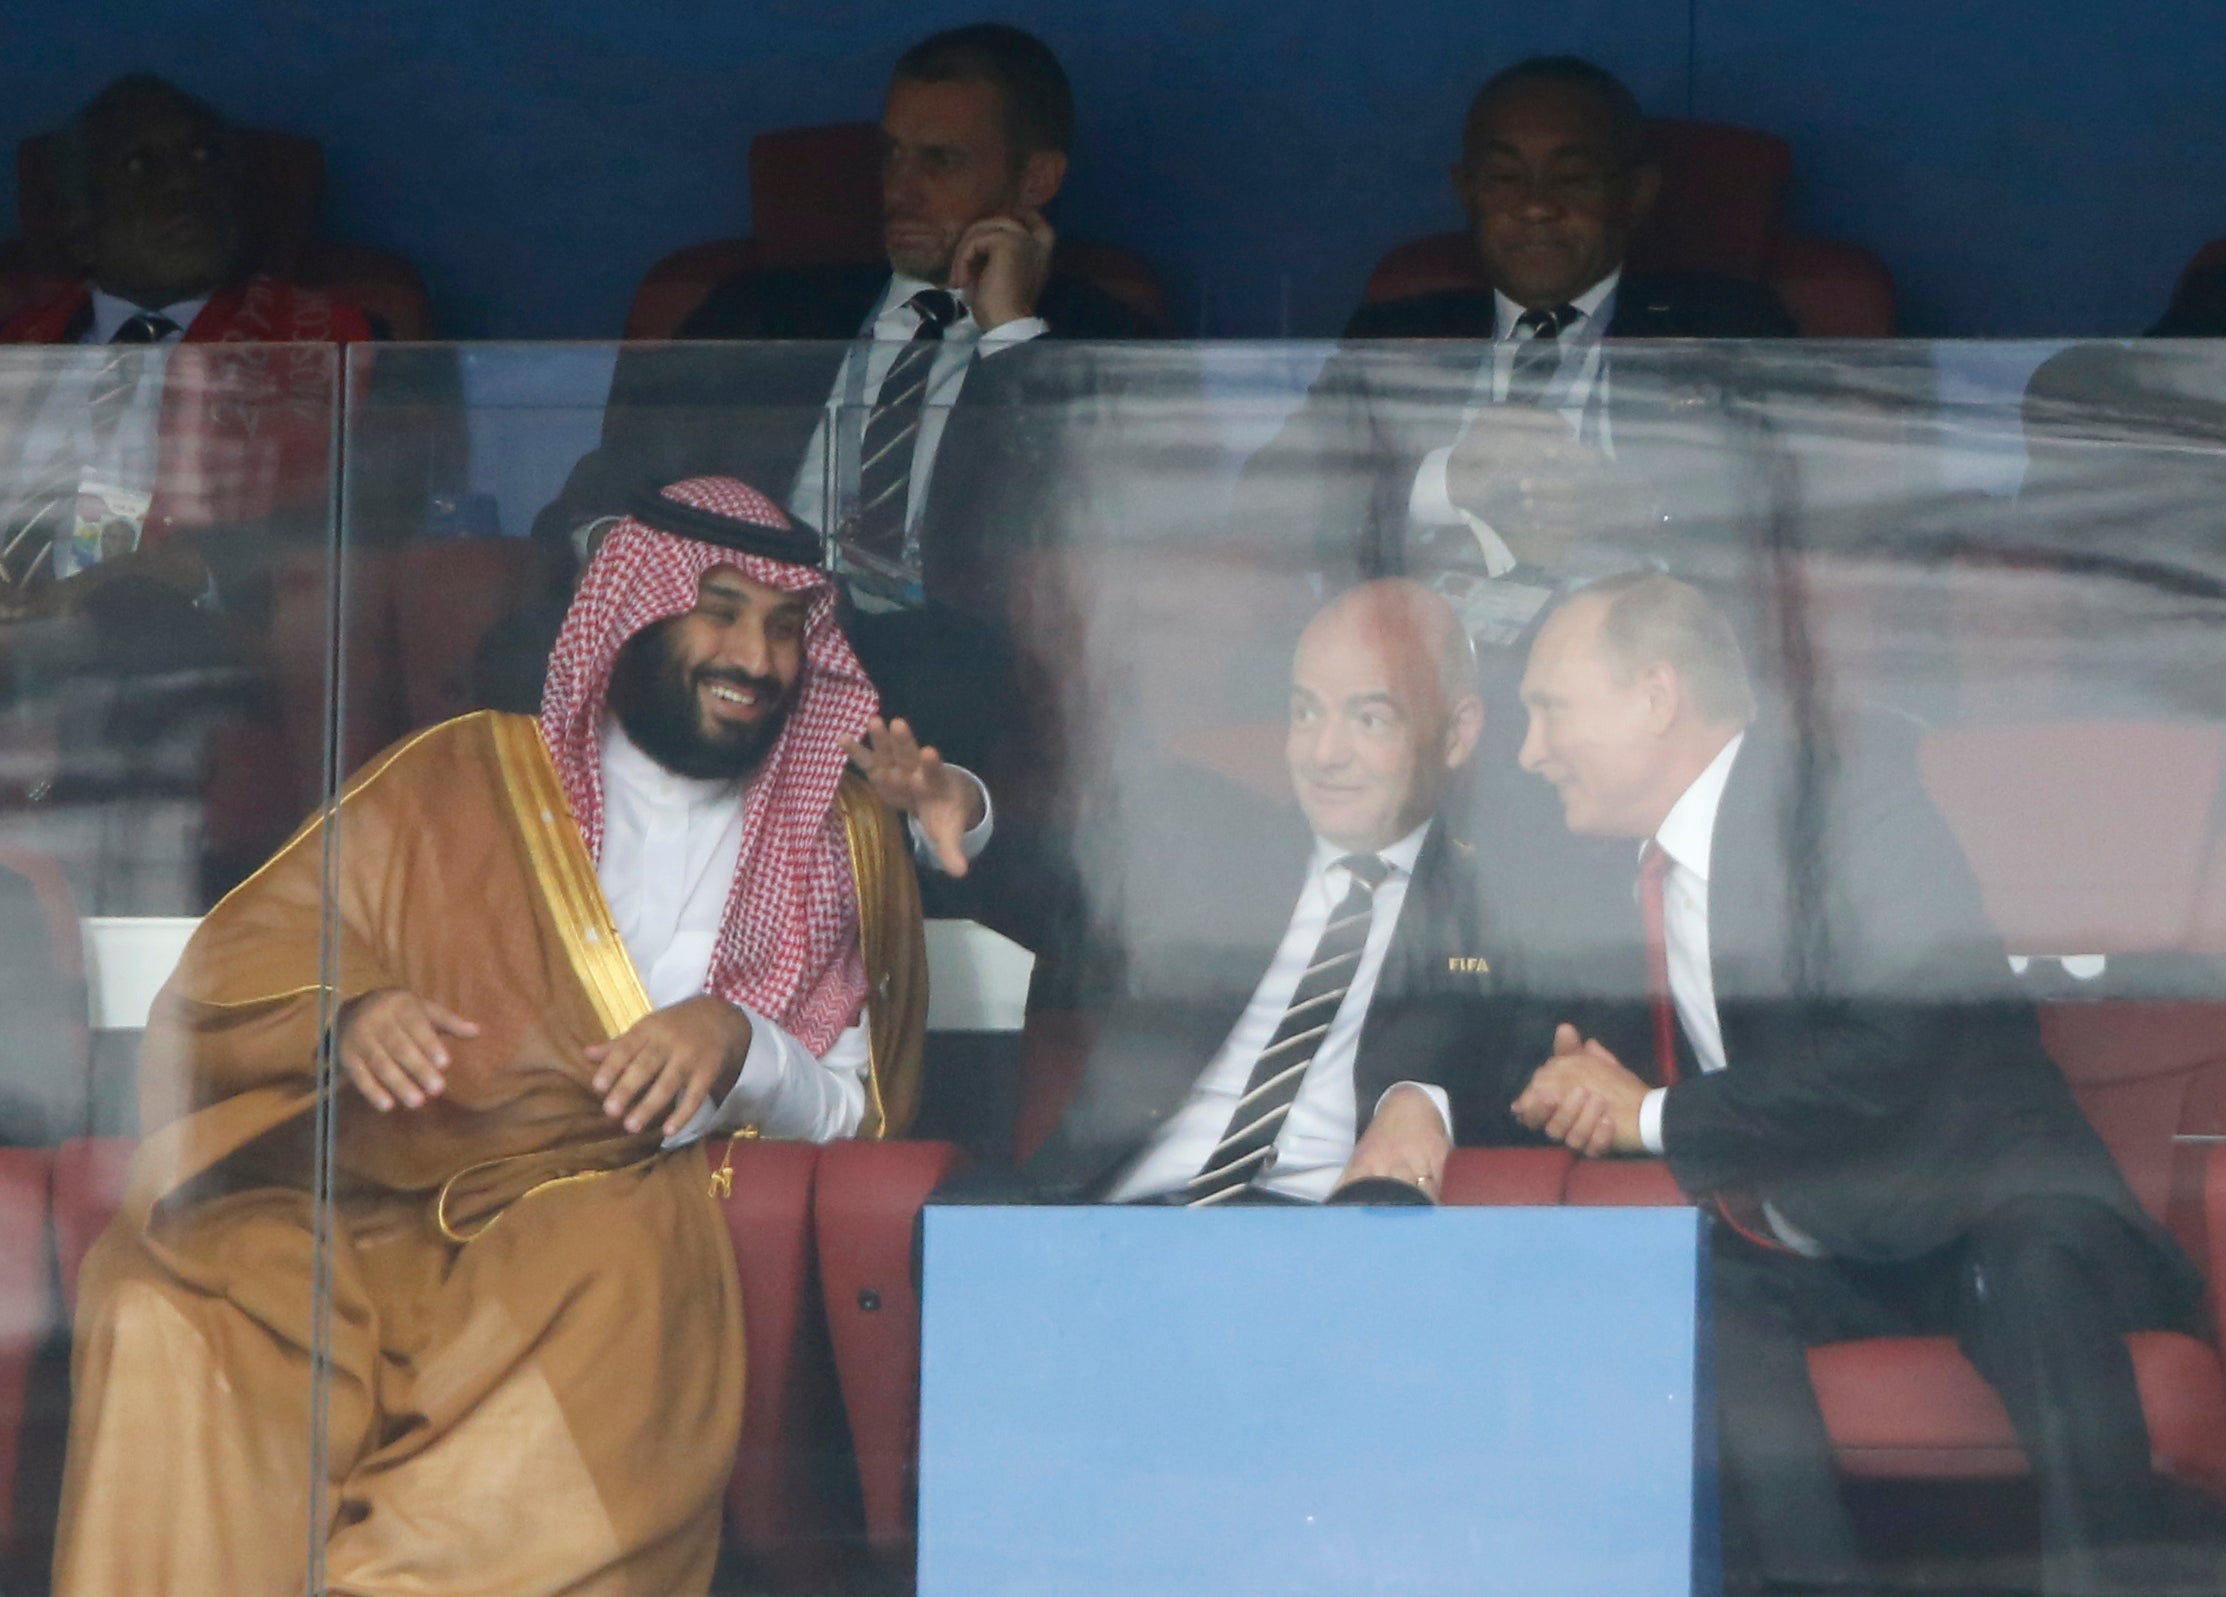 Prince Mohammed, Infantino and Putin at the 2018 World Cup